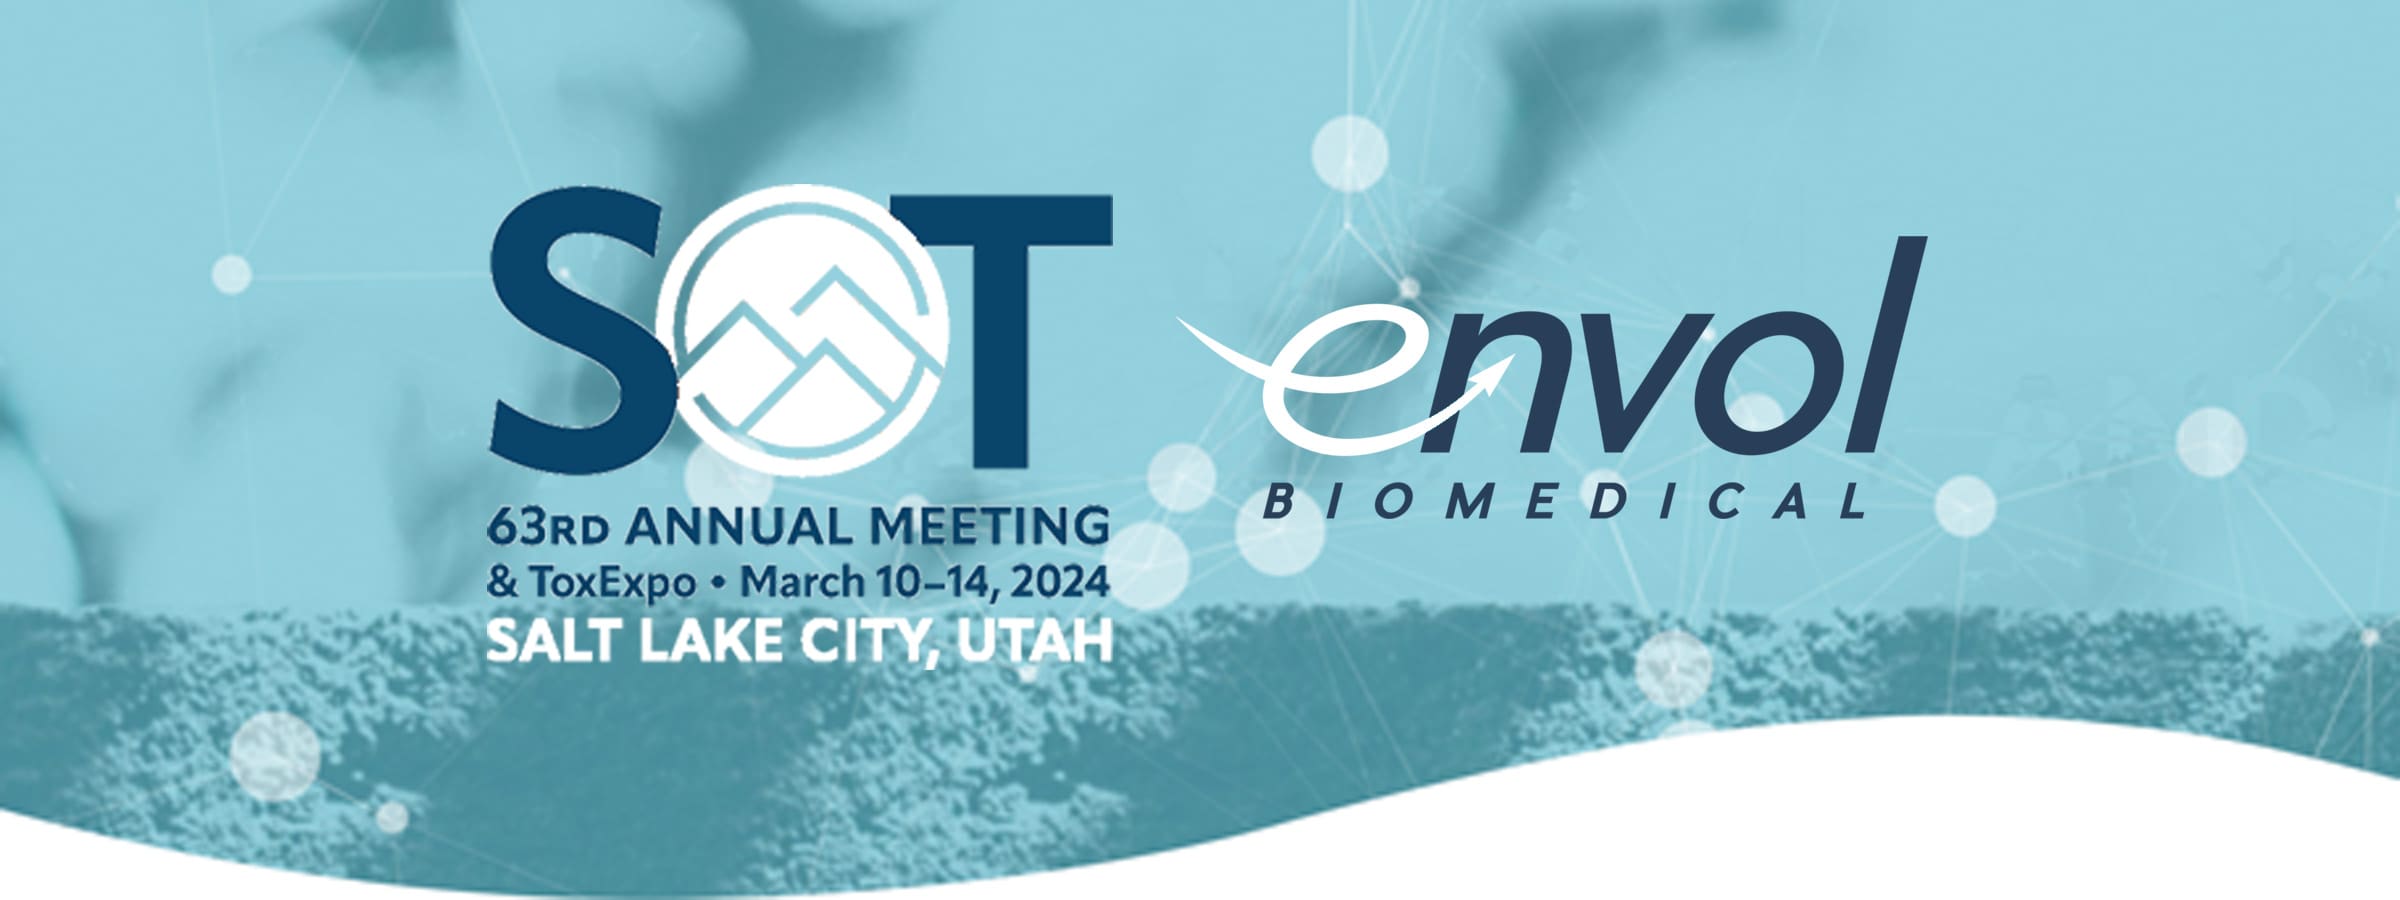 Featured image for “Make Your Plans Now to Meet the Envol Team at SOT 2024 in Salt Lake City, Booth 708-UU”